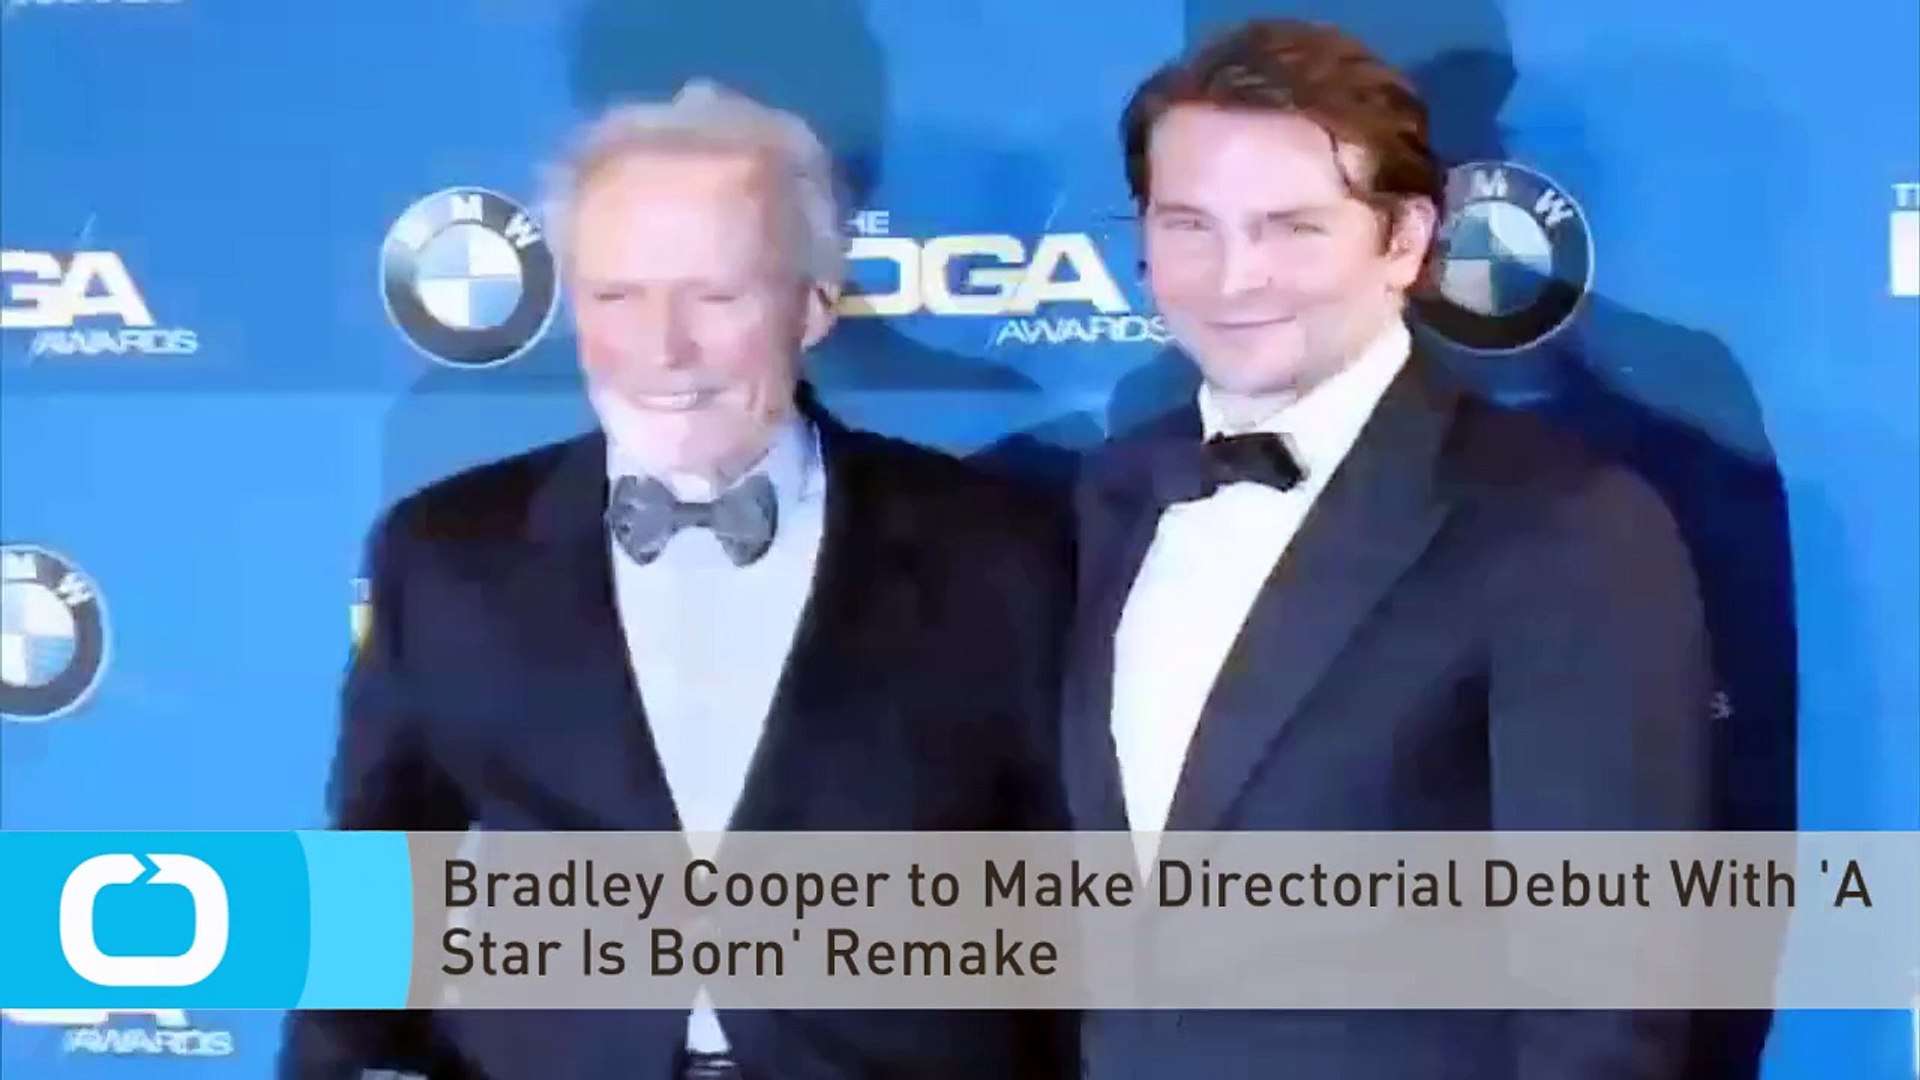 ⁣Bradley Cooper to Make Directorial Debut With 'A Star Is Born' Remake